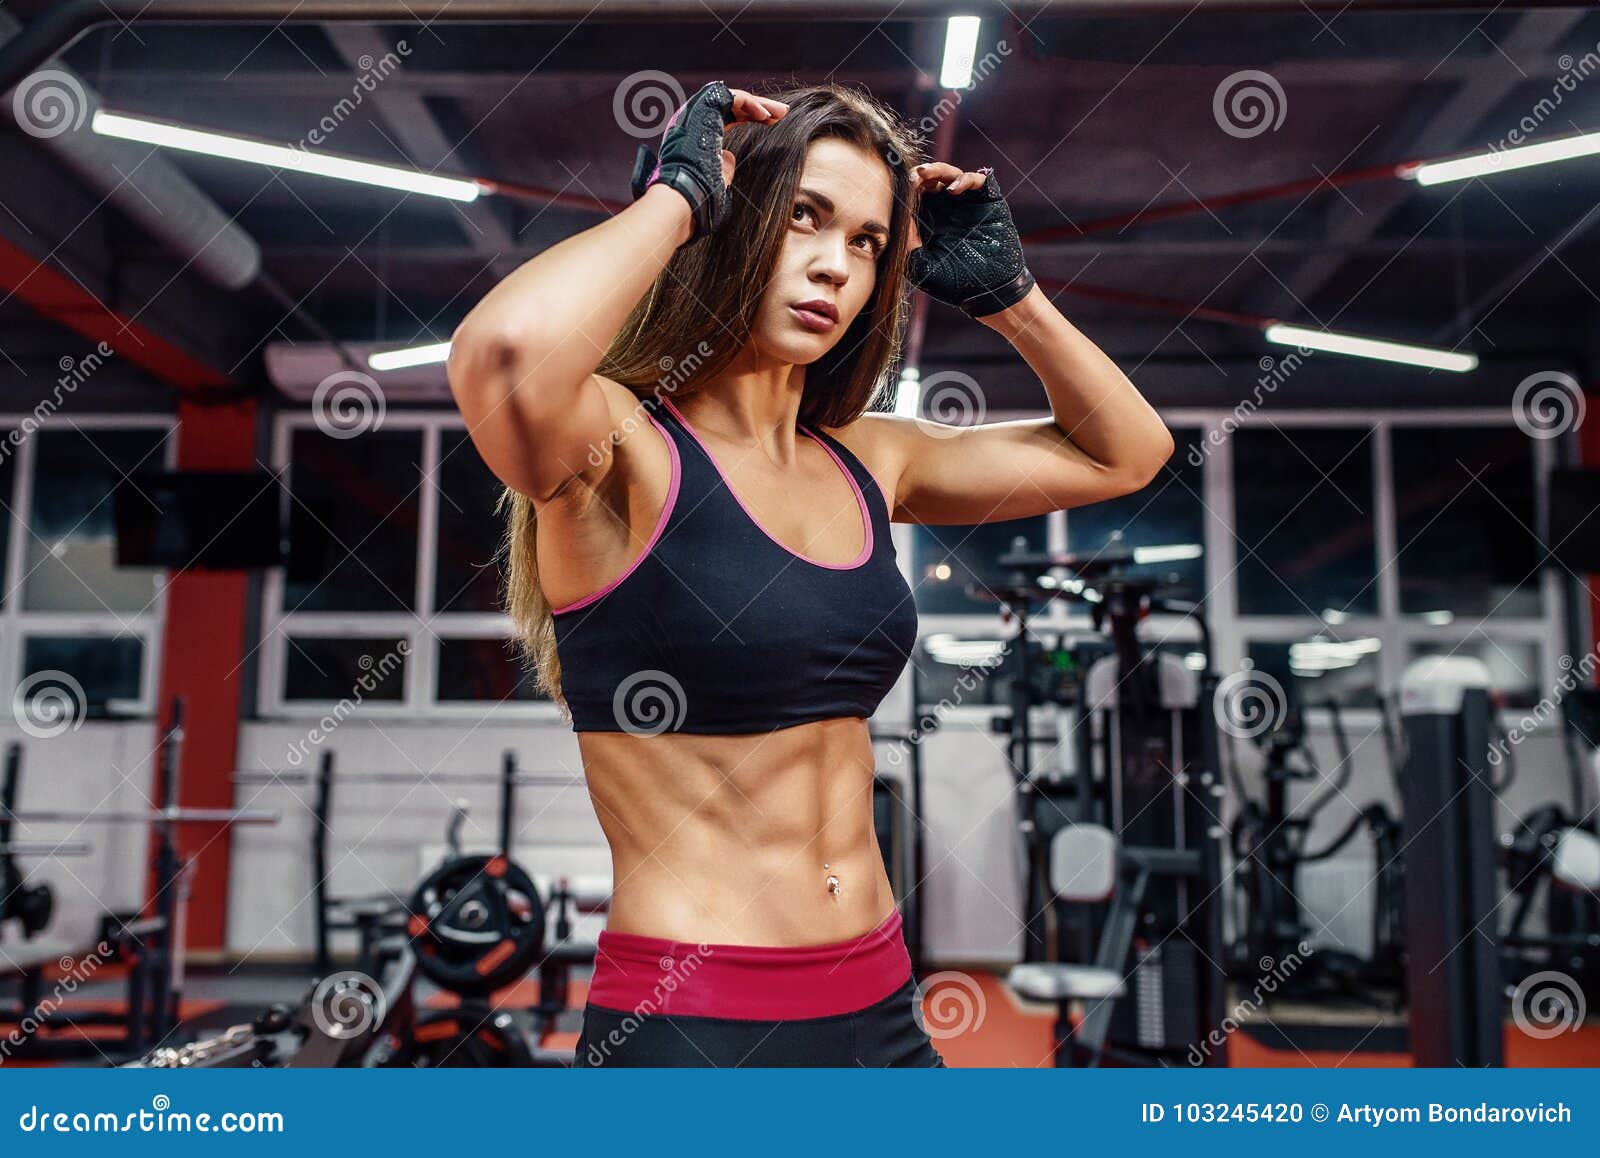 athletic young woman showing muscles after workout in gym.